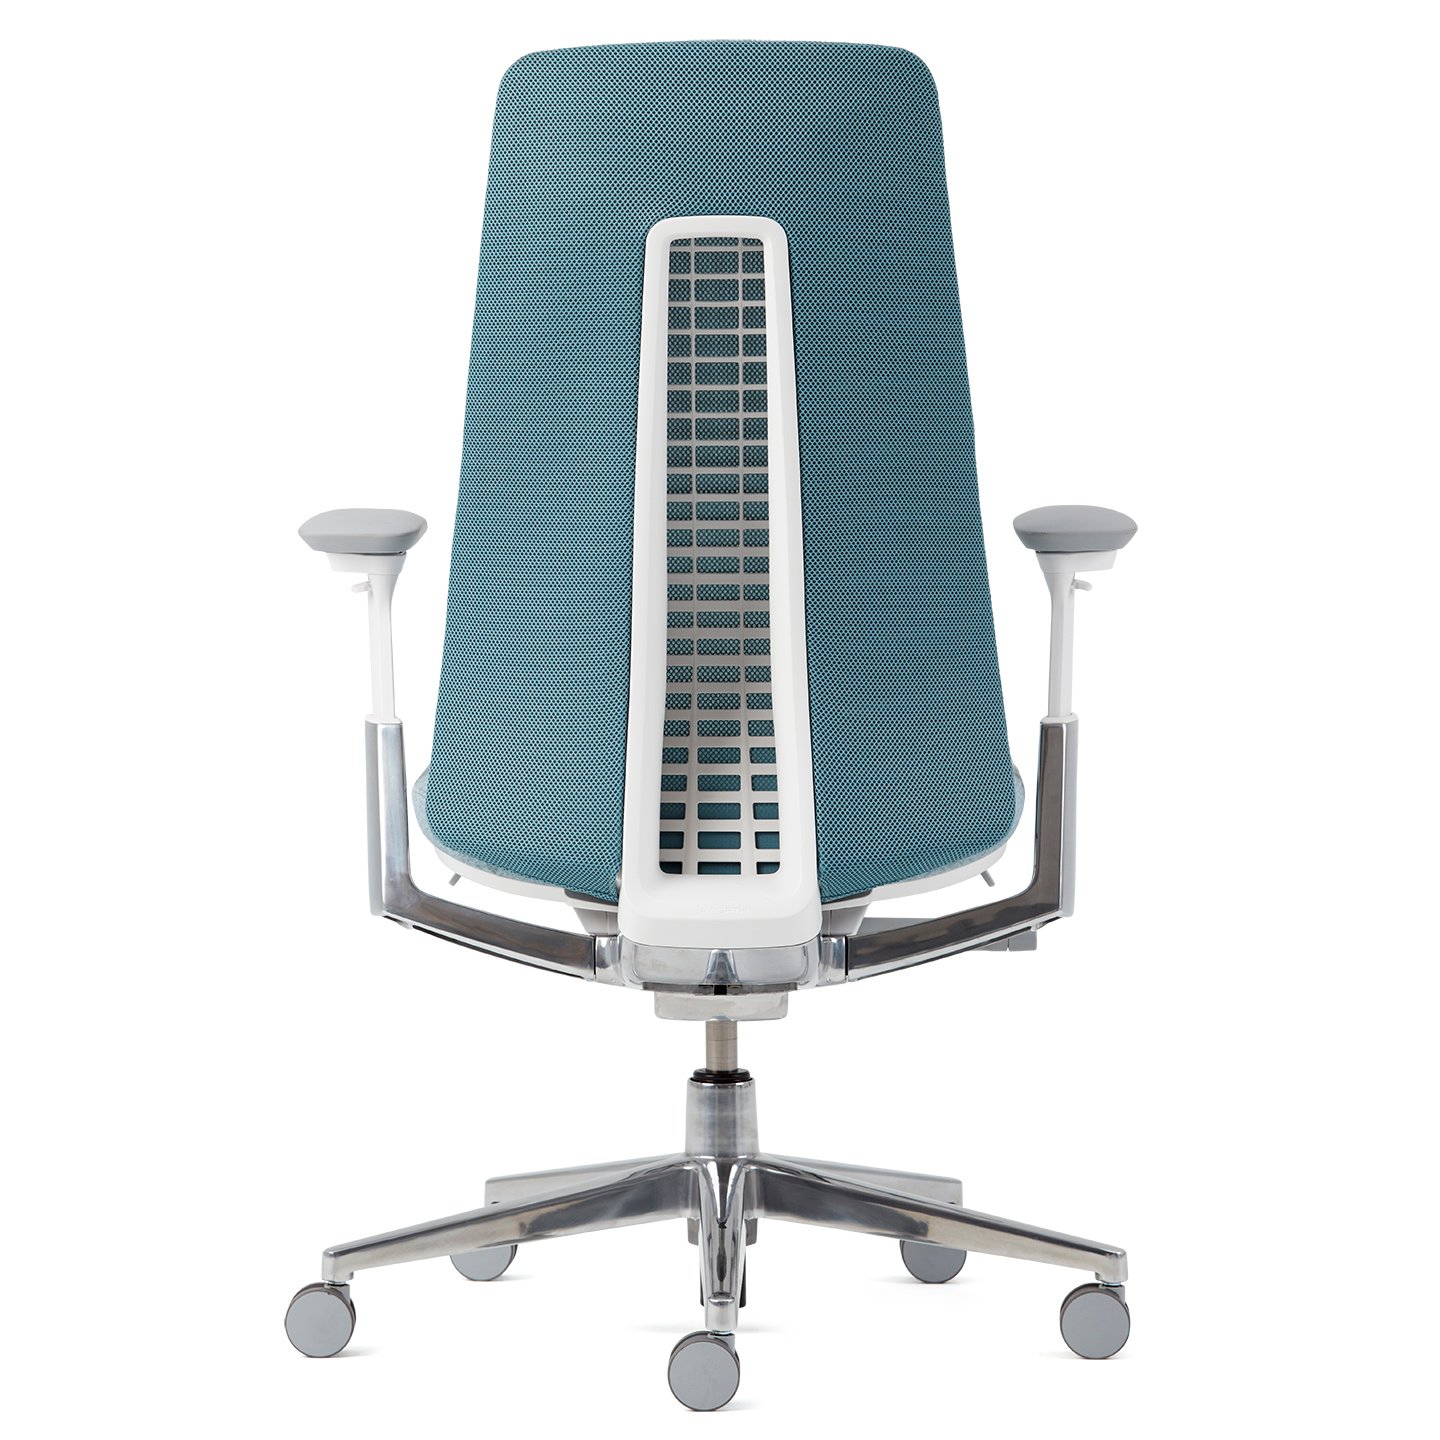 Haworth Fern Task chair in blue upholstery back view